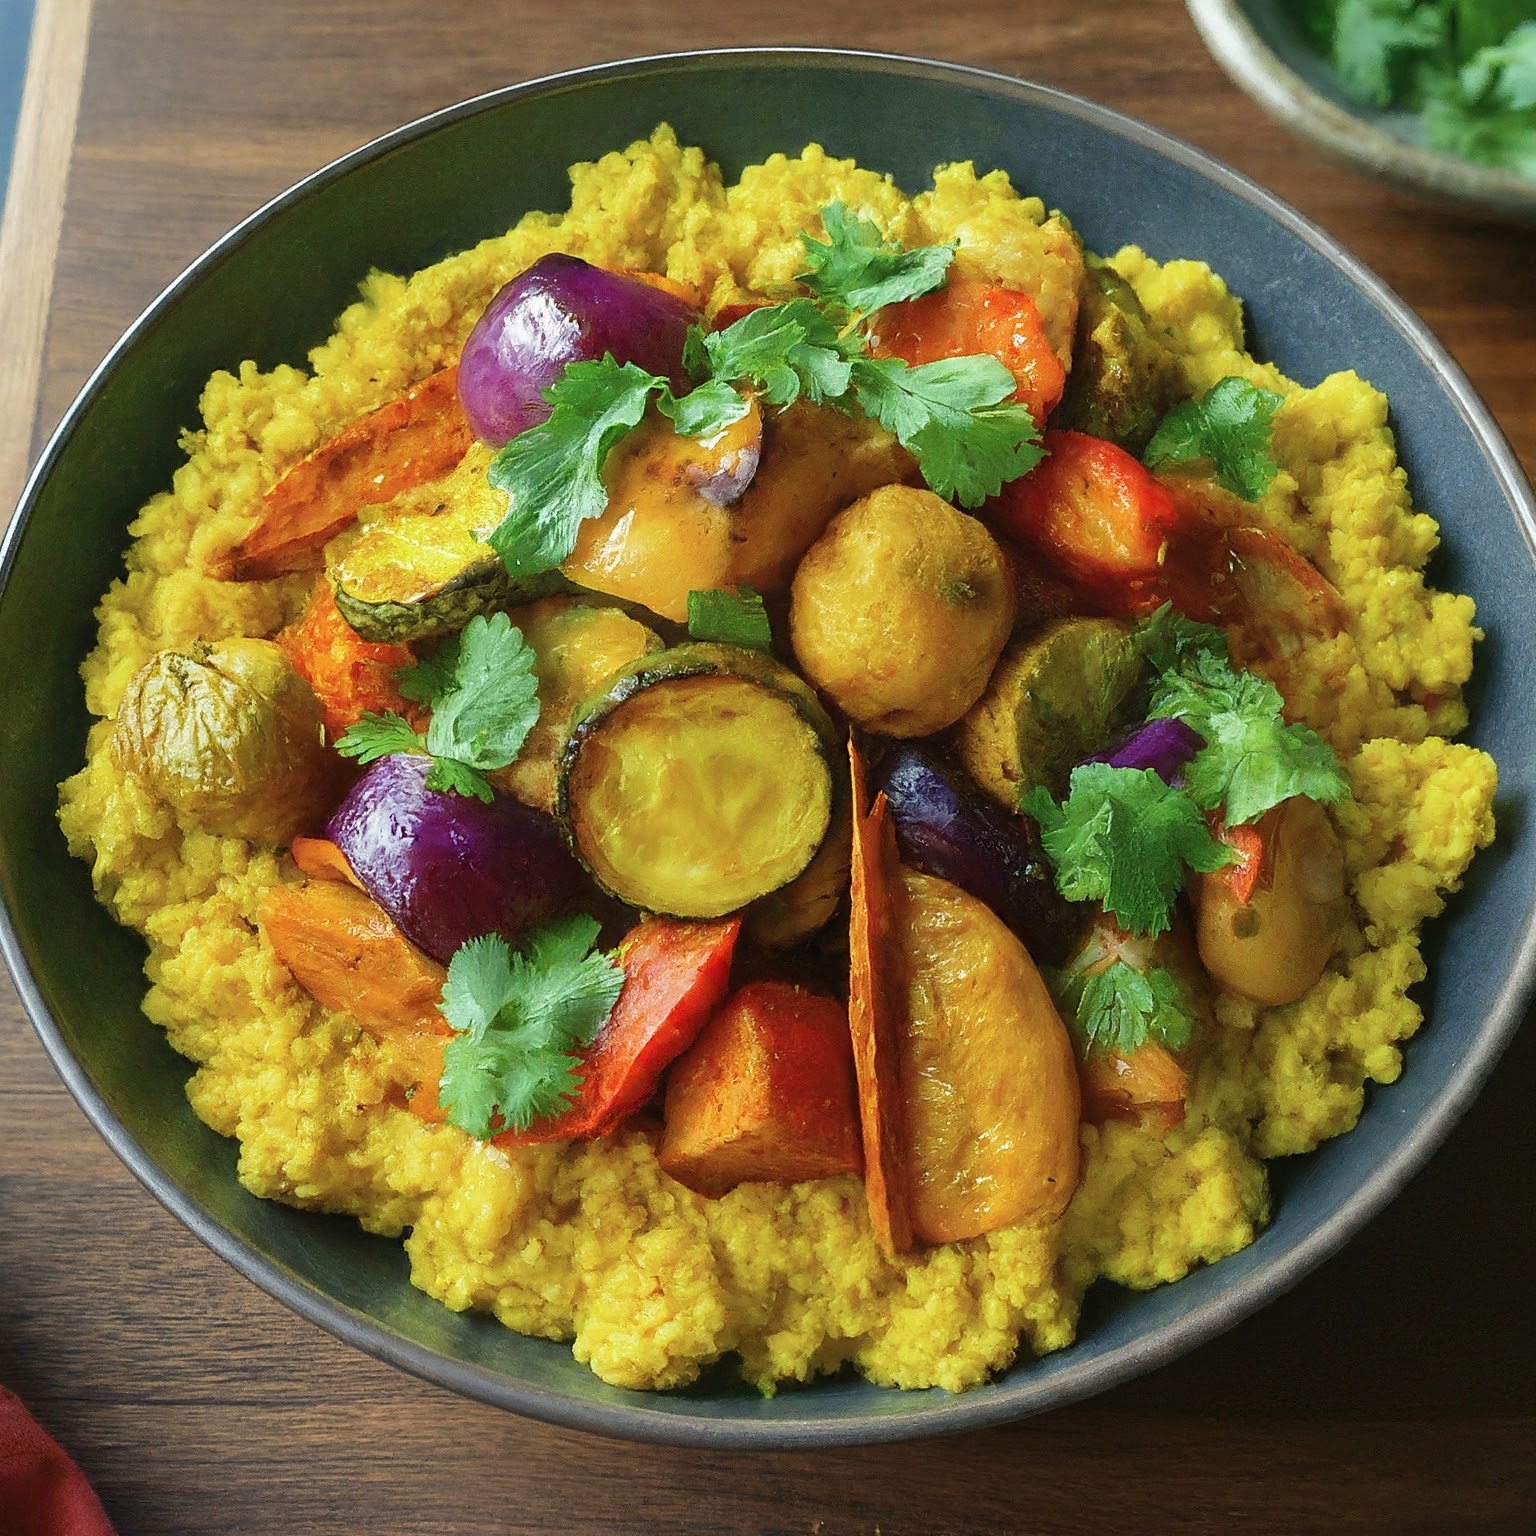 A dish of curried millet with roasted vegetables and fresh cilantro.